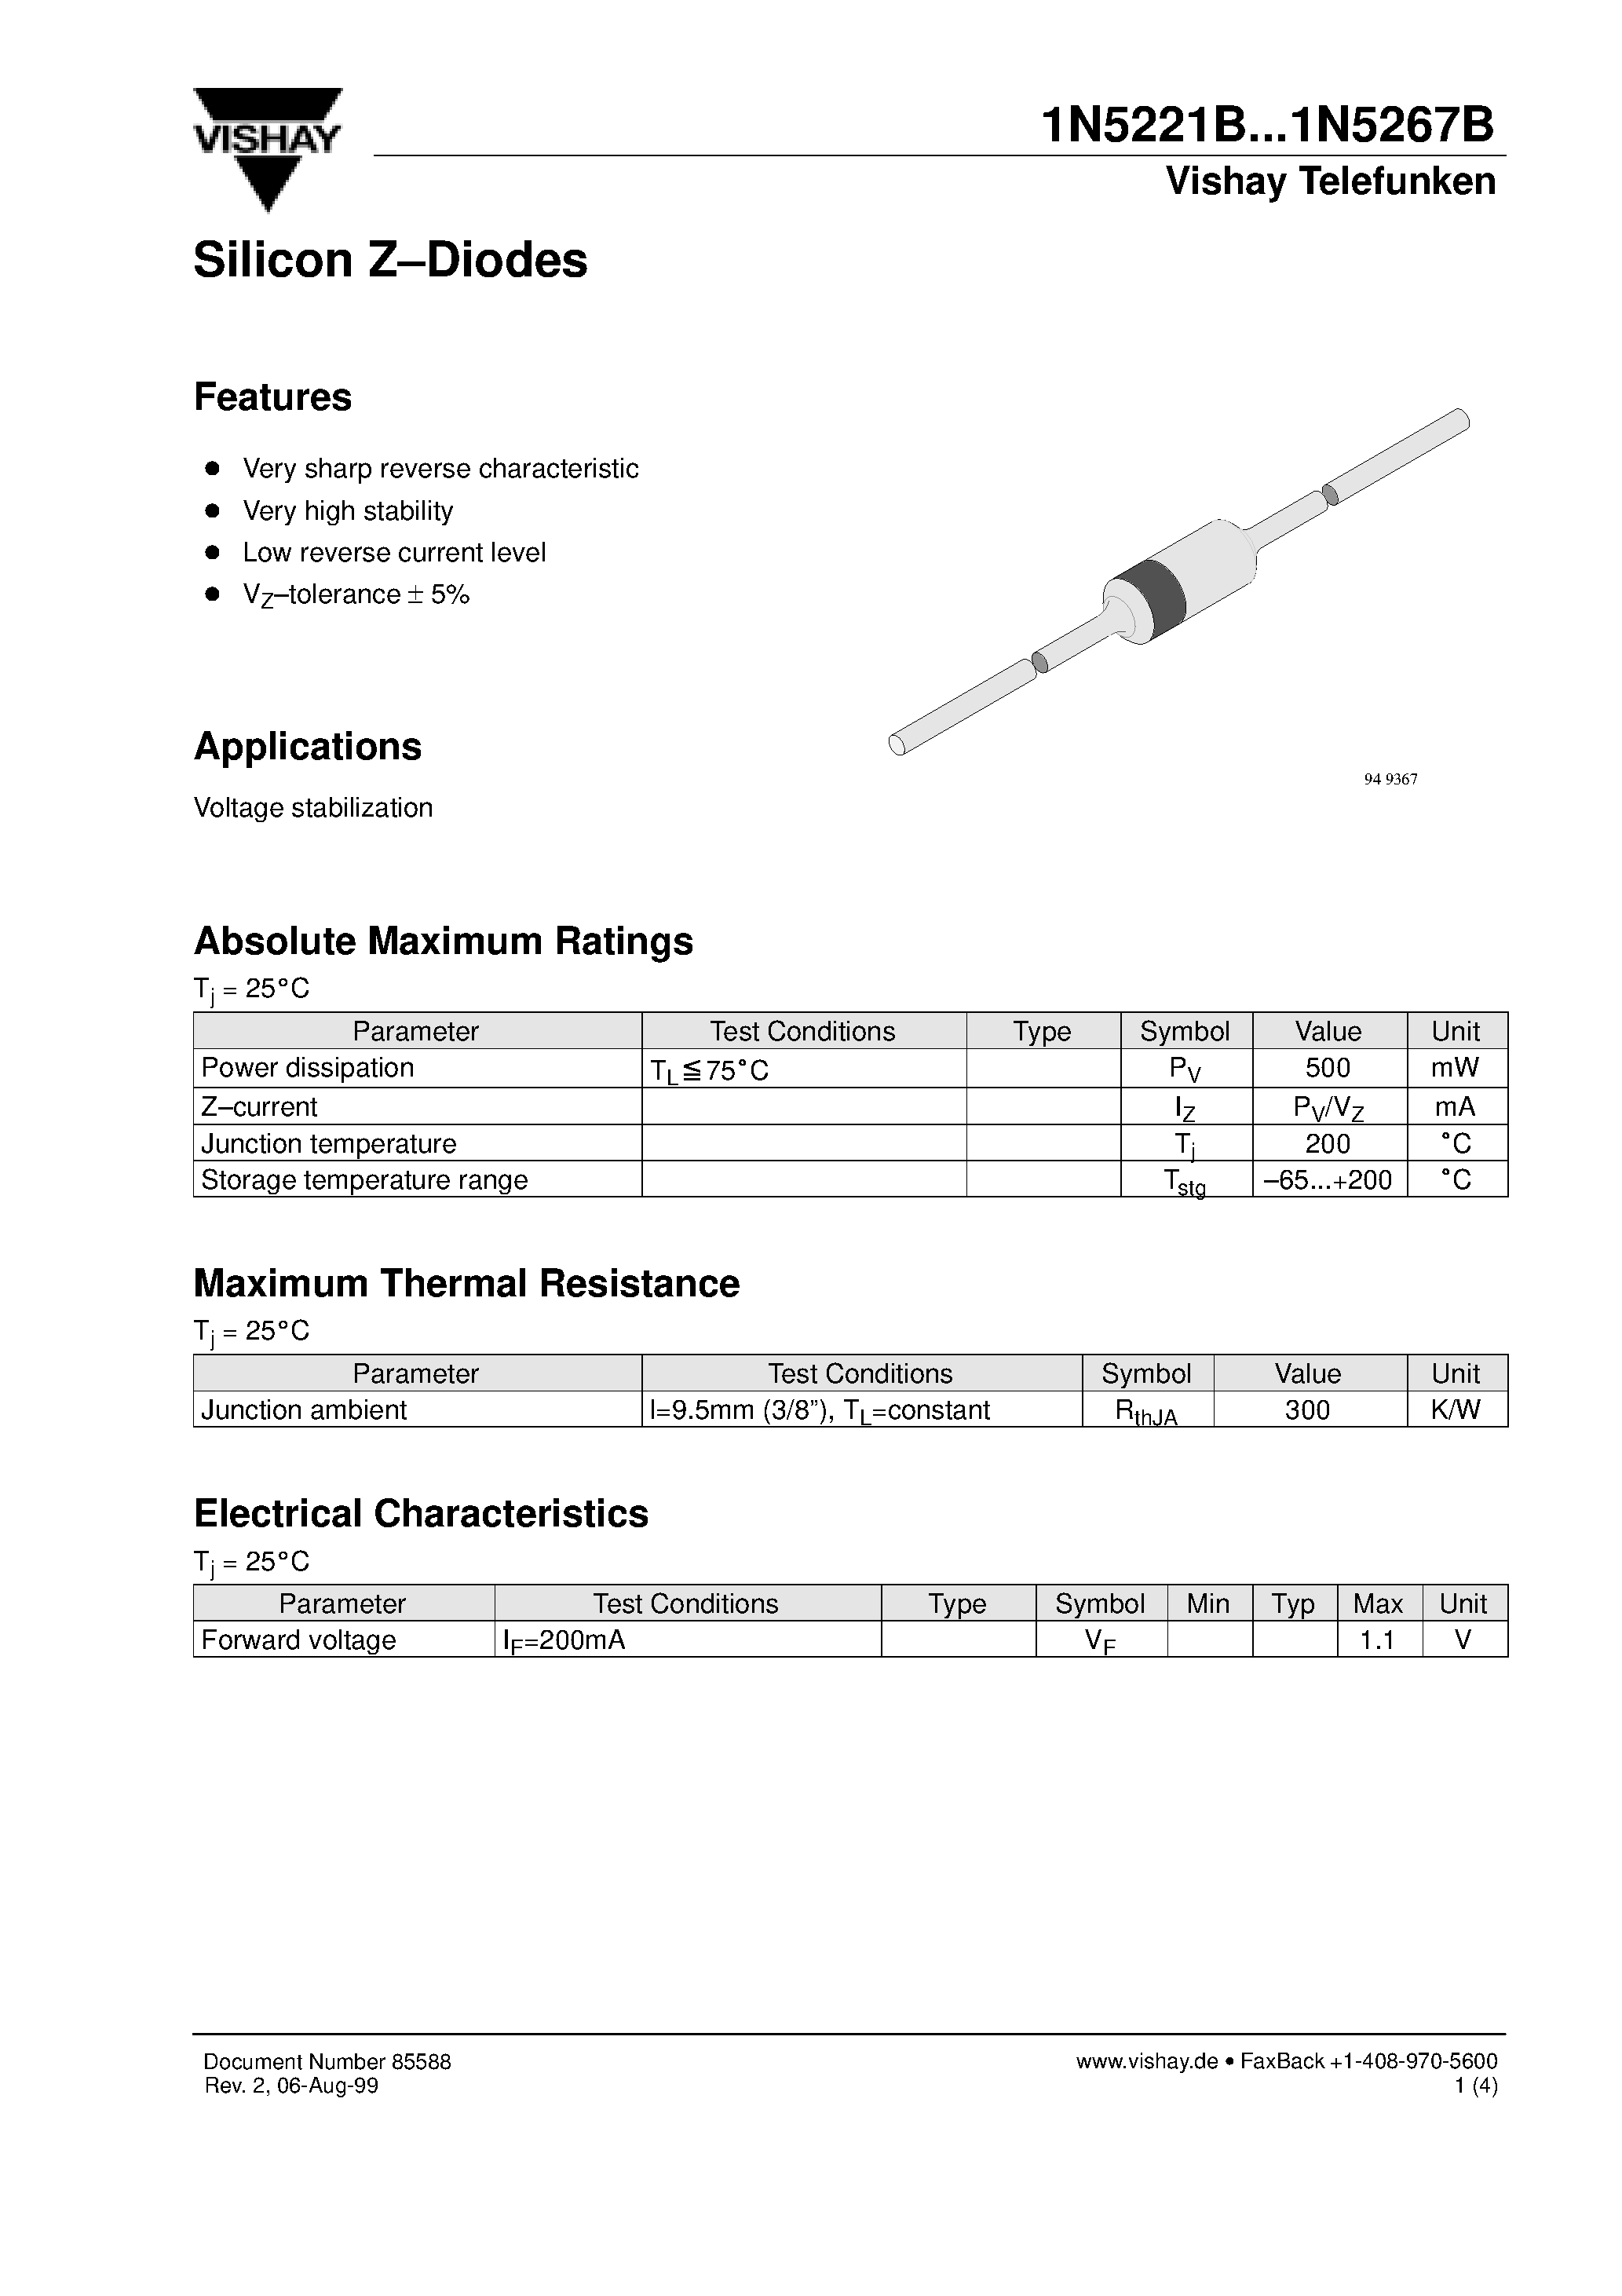 Datasheet 1N5236B - Silicon Z-Diodes page 1